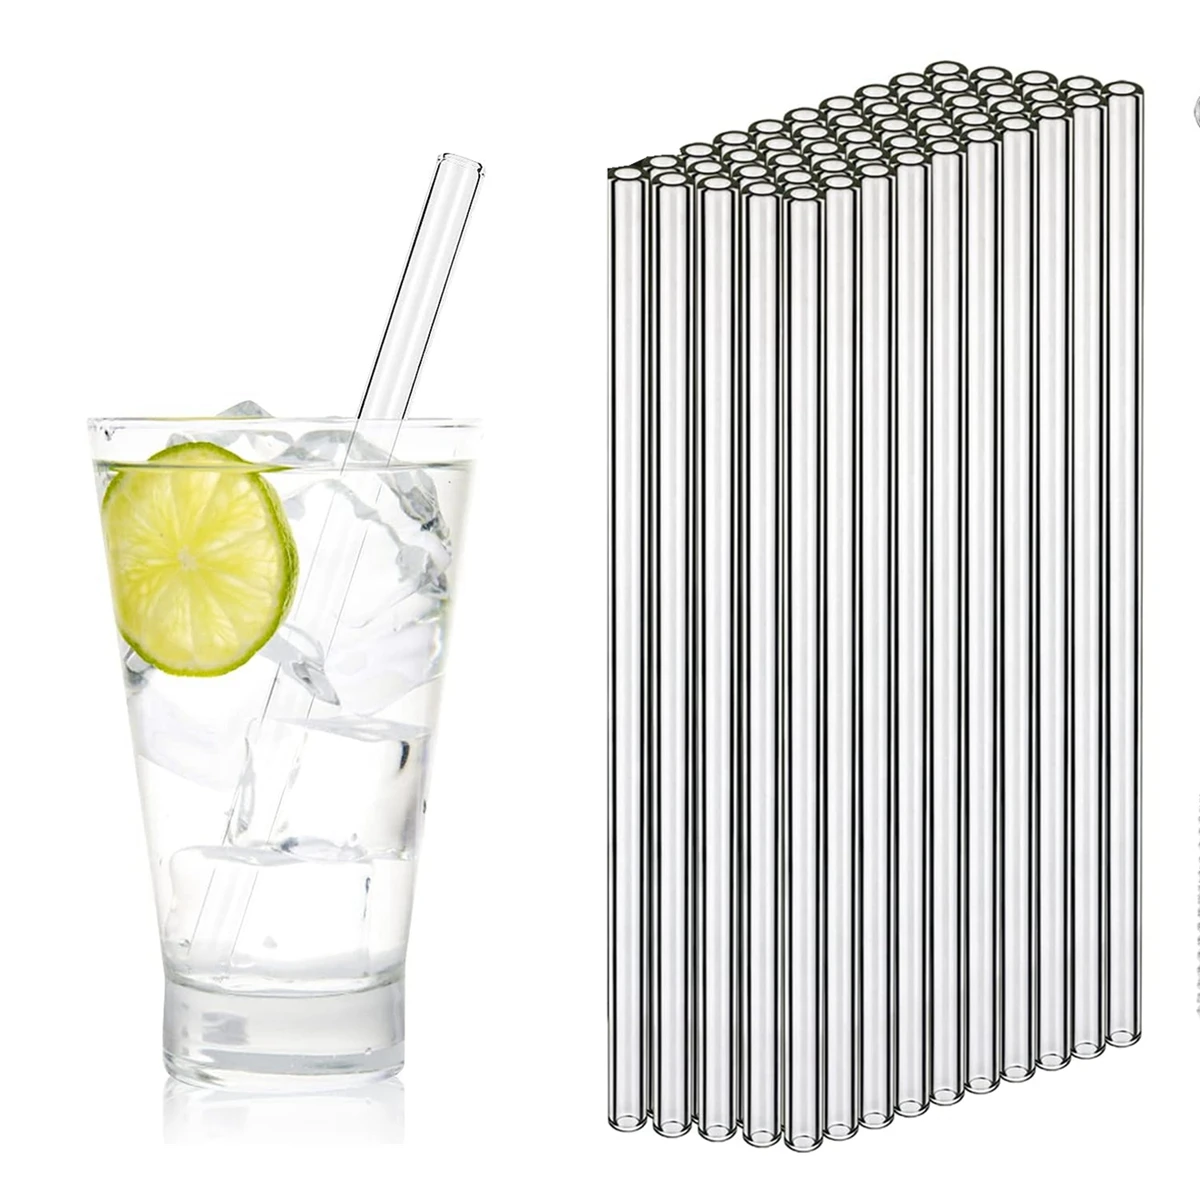 

50pcs Barware Eco-friendly Straws 8*200mm Glass Reusable Straws Straws Drinkware Smoothies For Cocktails Drinking Accessories